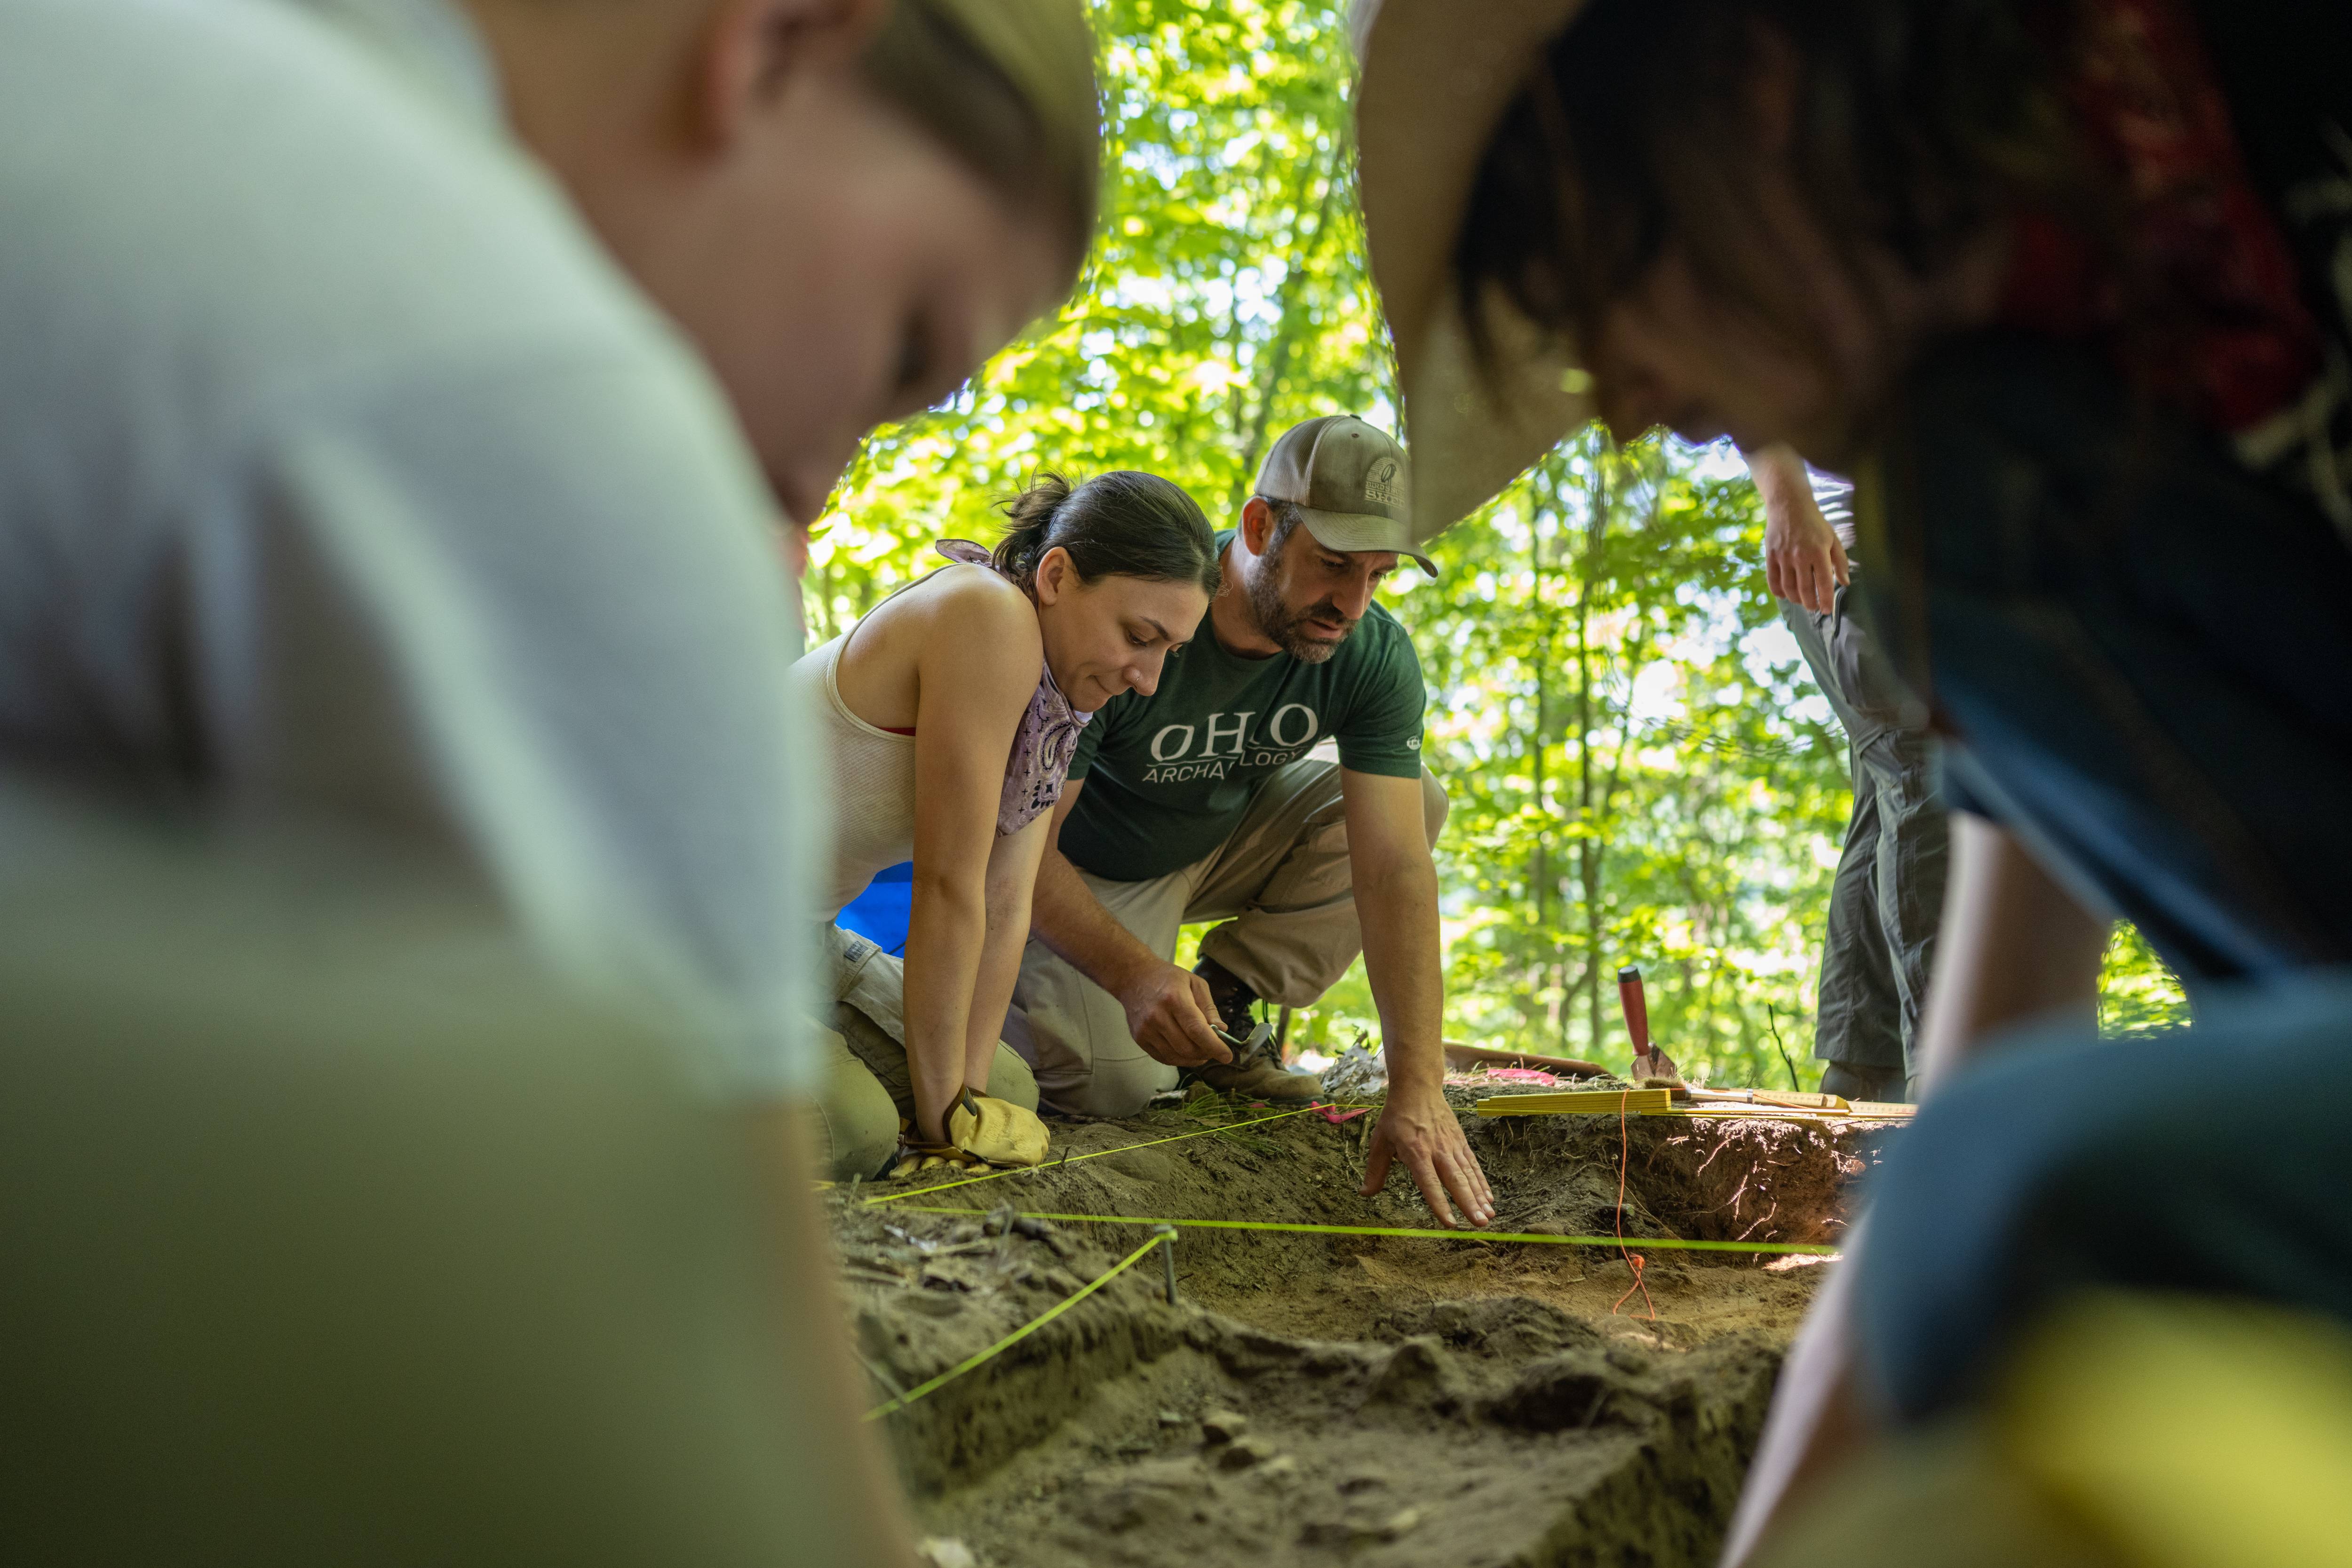 Dr. Joseph Gingerich and students found more evidence to show that "Ohio is home to some of the oldest known evidence of people in North America," he said. Photo by Ben Siegel